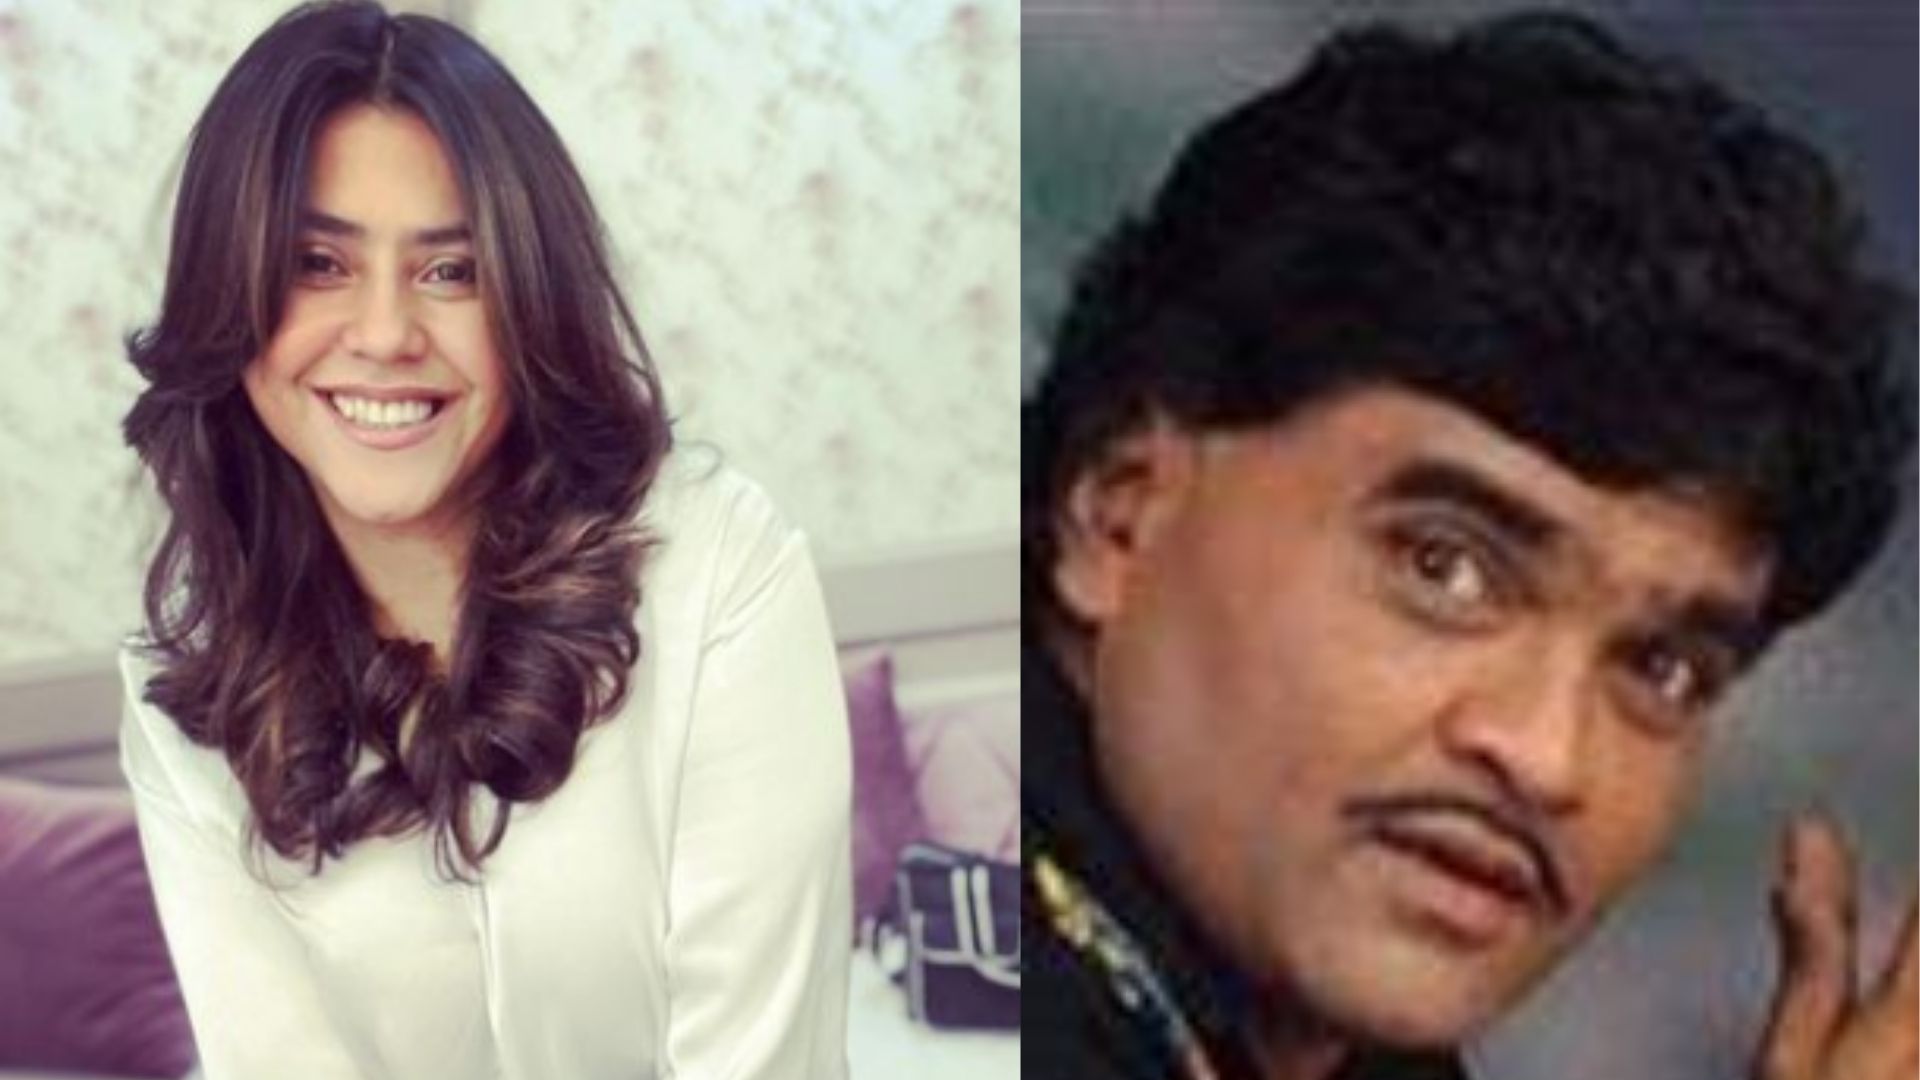 Ekta Kapoor Remembers The Days Of Working With Ashok Saraf In ‘Hum Paanch’, Says “He Agreed To Work With Me When I Was Just 17”